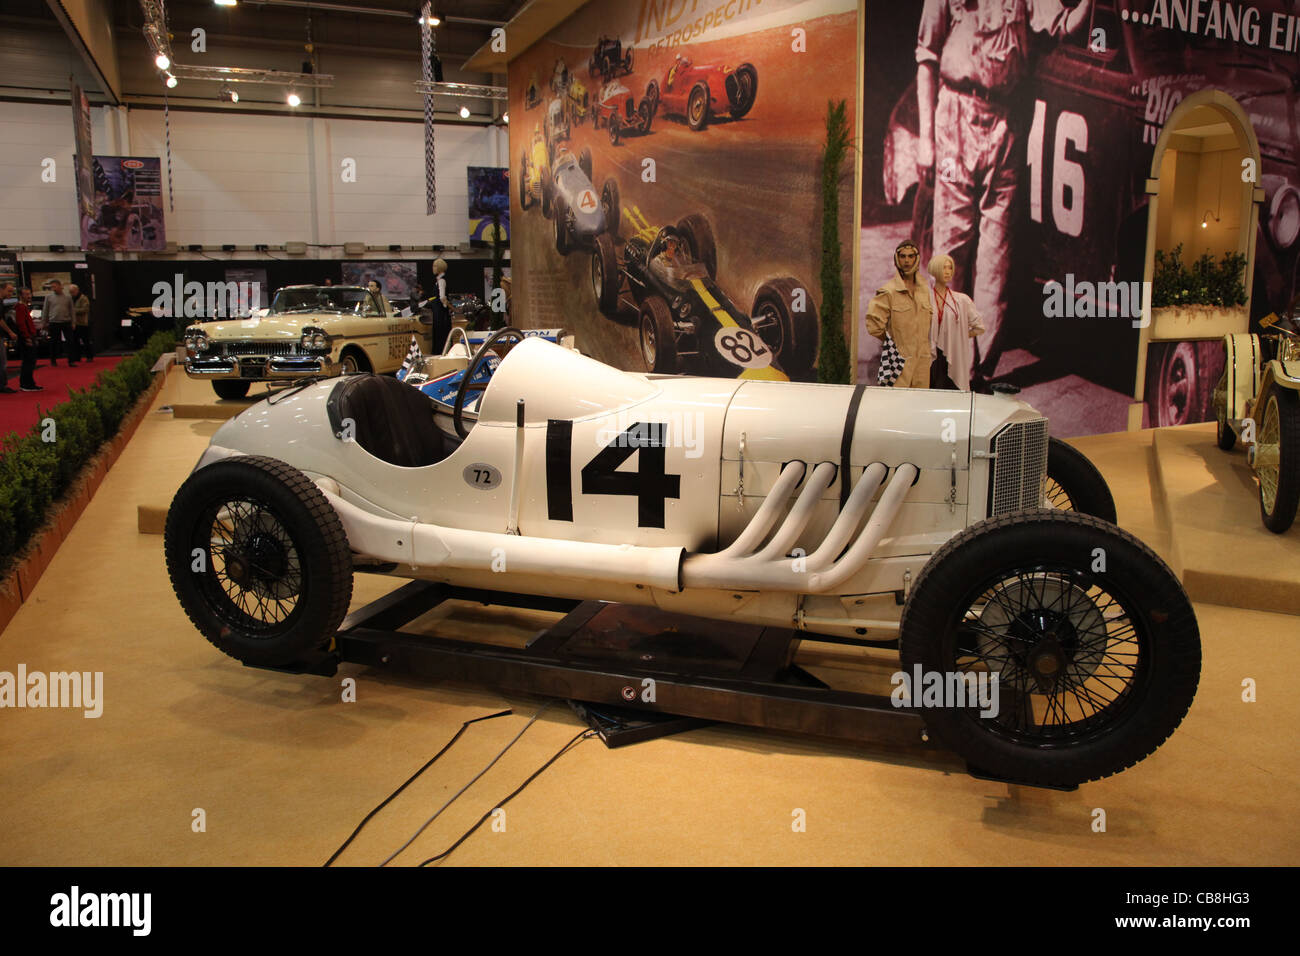 ESSEN, GERMANY - NOV 29: Historic Mercedes-Benz Racing Car shown at the Essen Motor Show in Essen, Germany, on November 29, 2011 Stock Photo